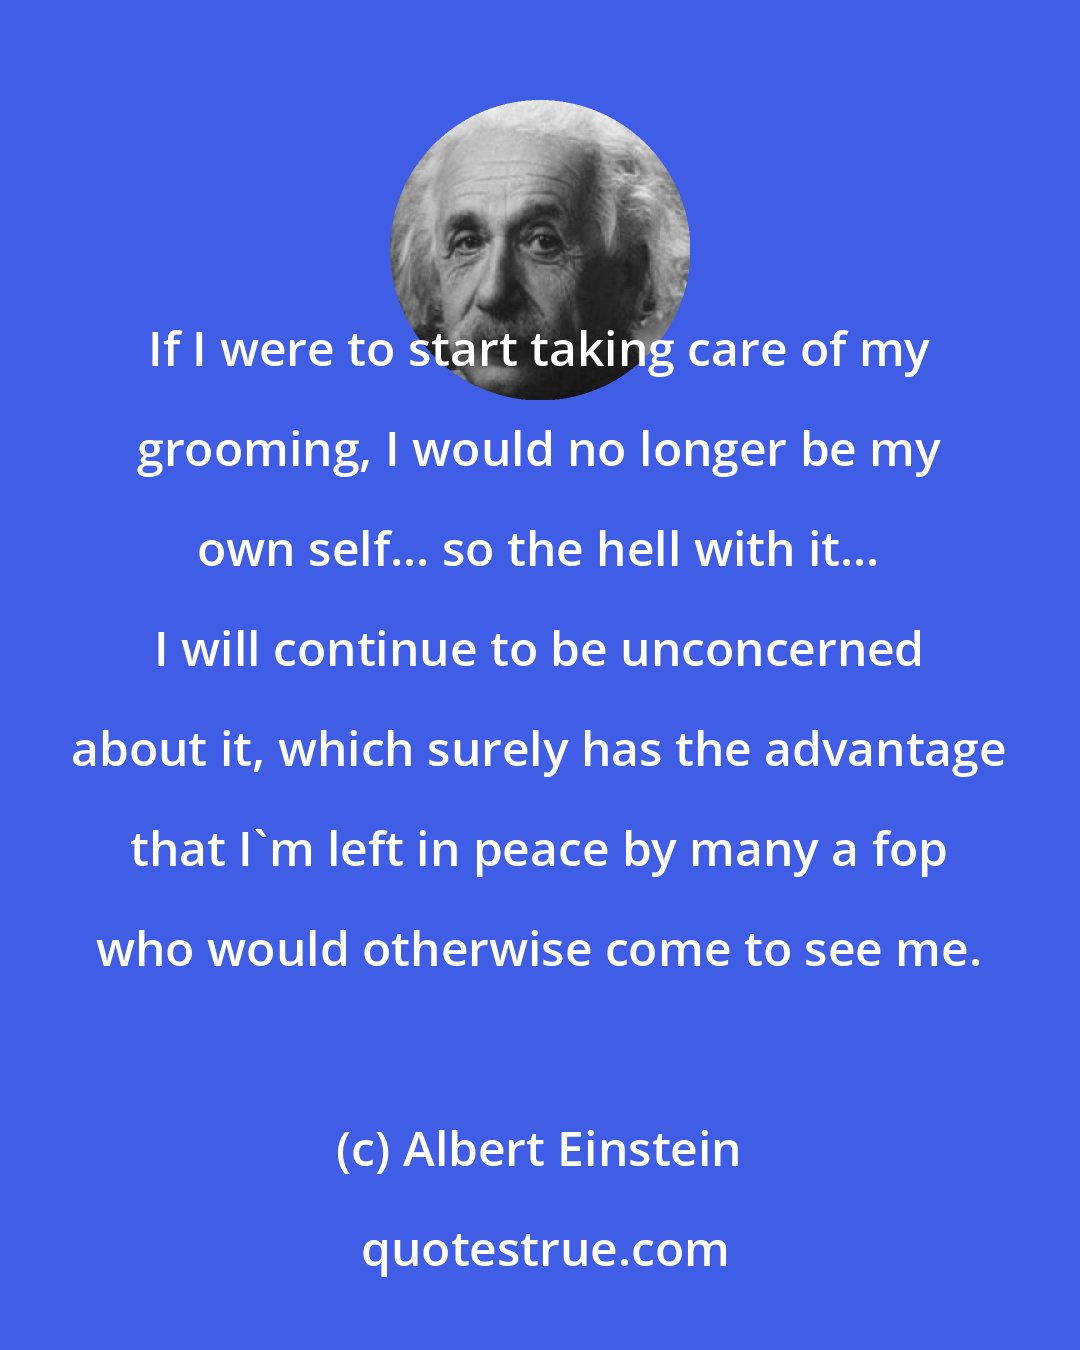 Albert Einstein: If I were to start taking care of my grooming, I would no longer be my own self... so the hell with it... I will continue to be unconcerned about it, which surely has the advantage that I'm left in peace by many a fop who would otherwise come to see me.